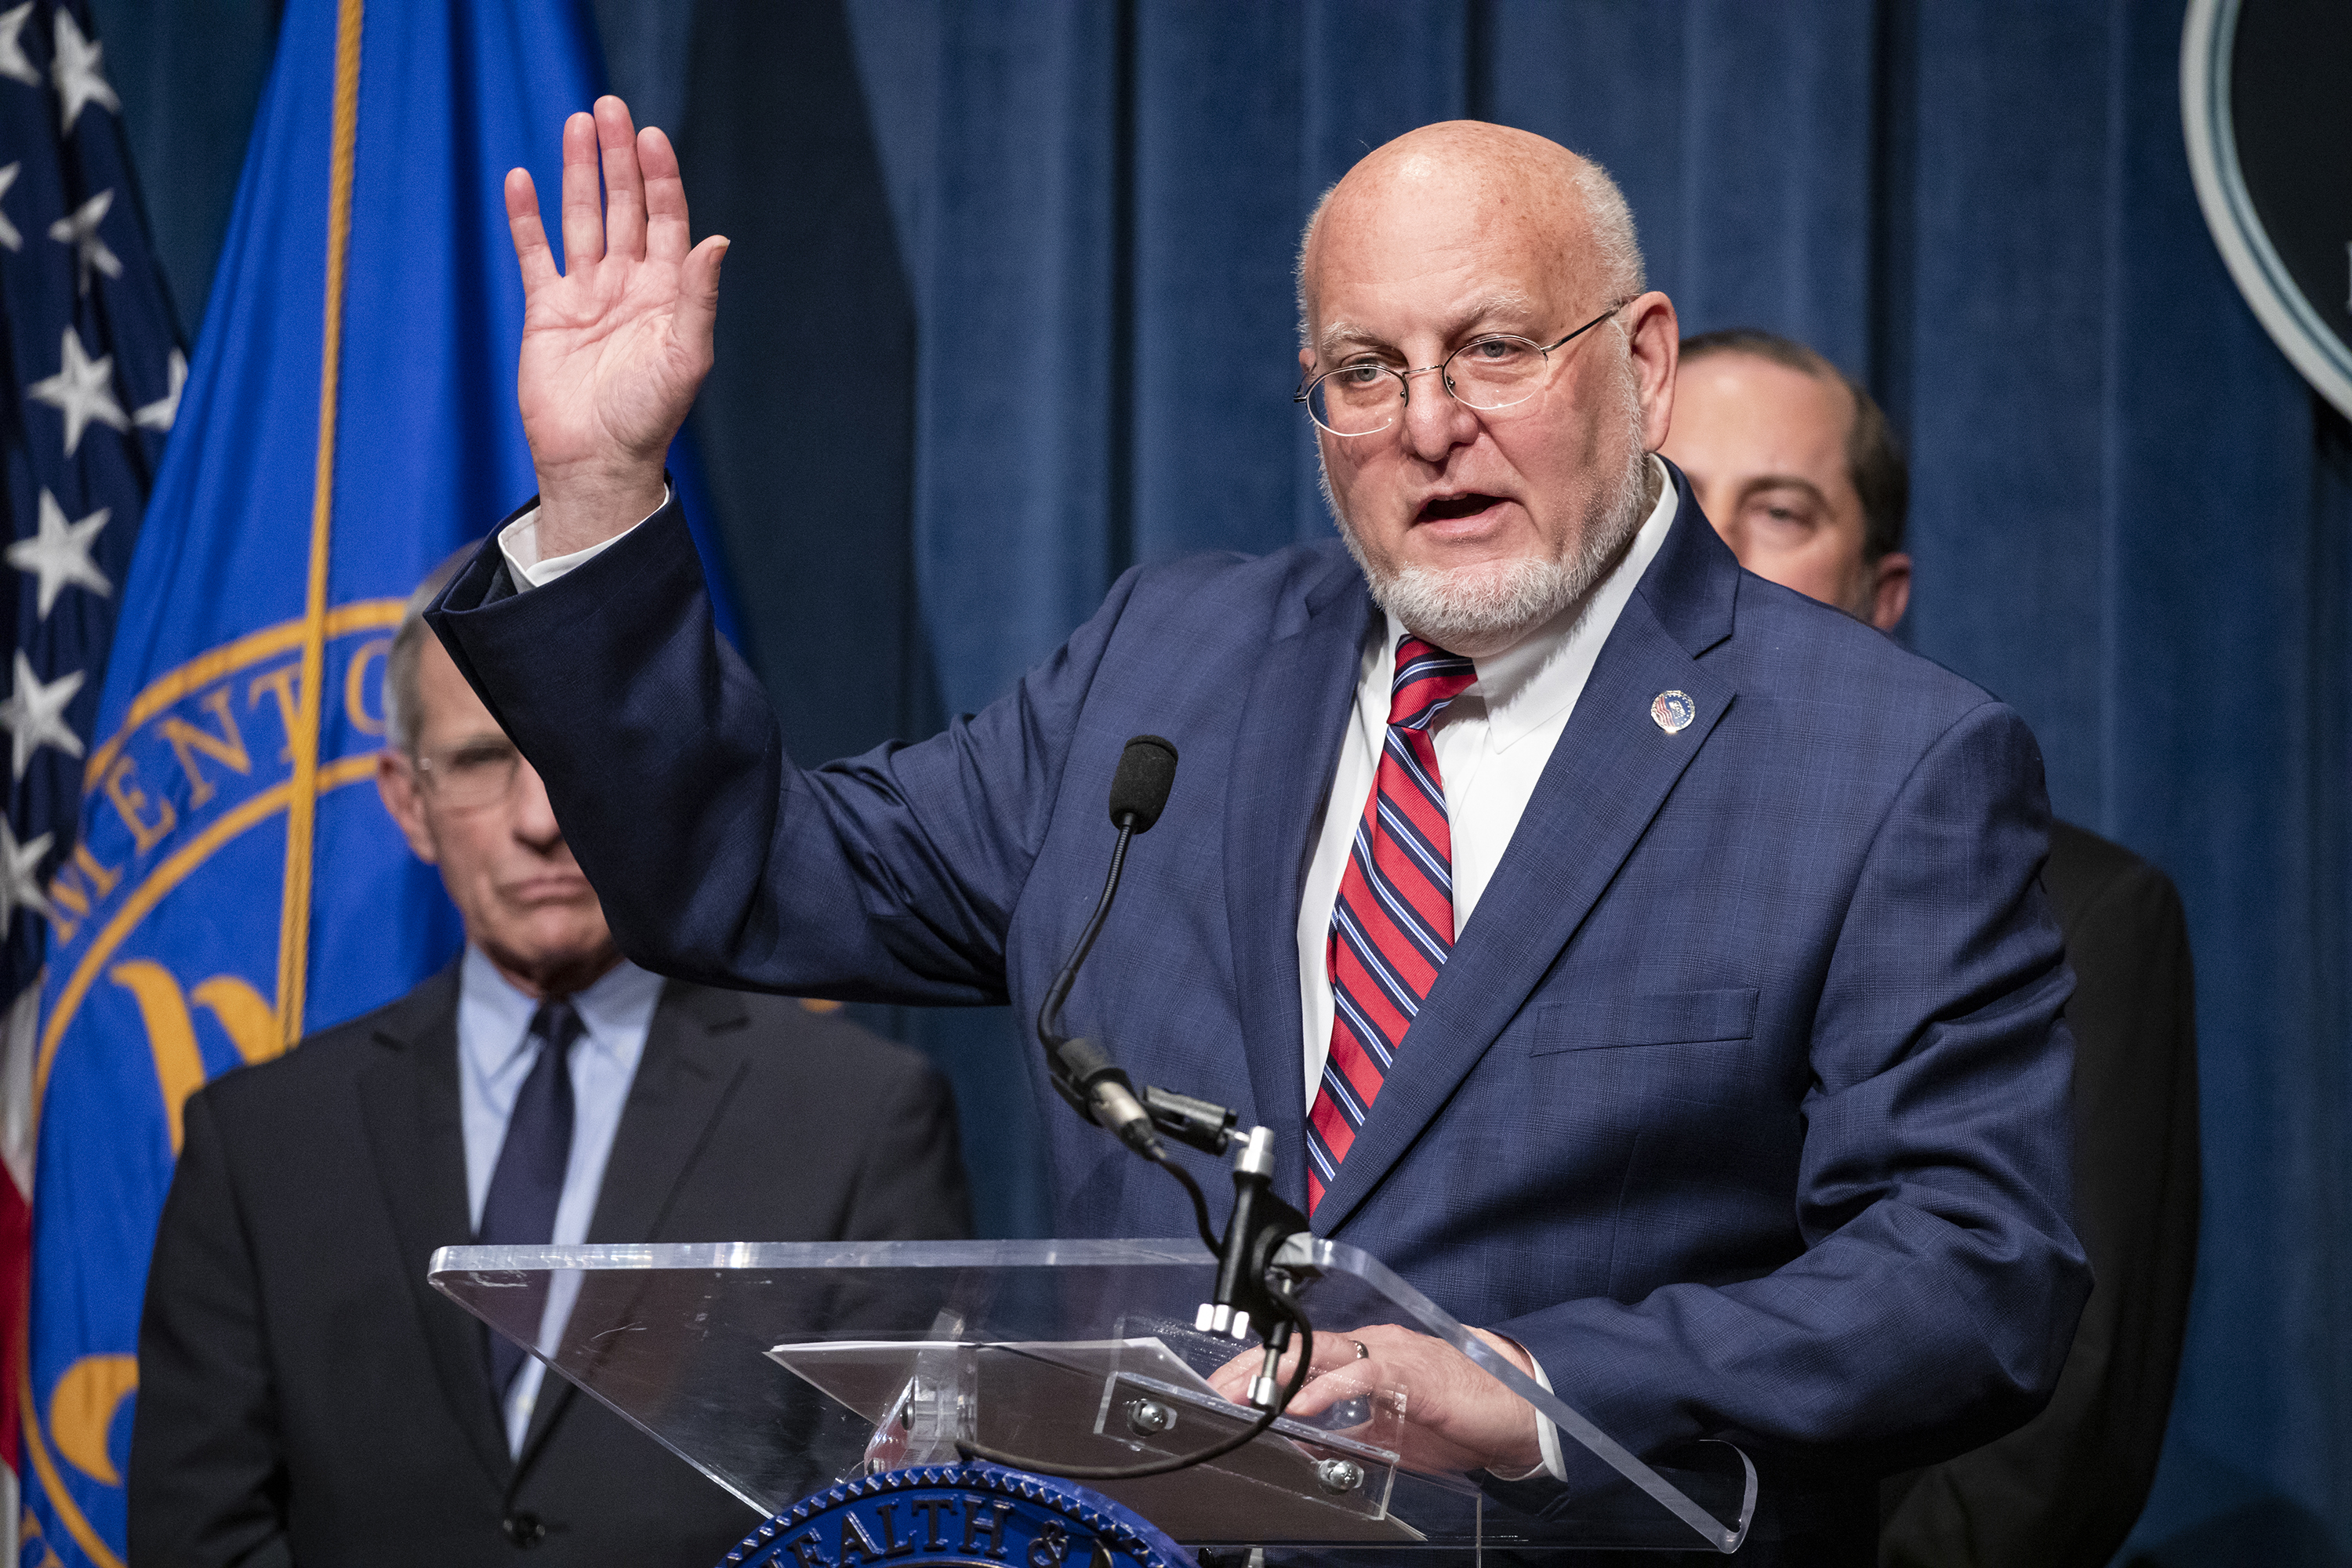 Centers for Disease Control and Prevention Director Dr. Robert Redfield speaks during a press conference on Friday, February 7, in Washington, DC.